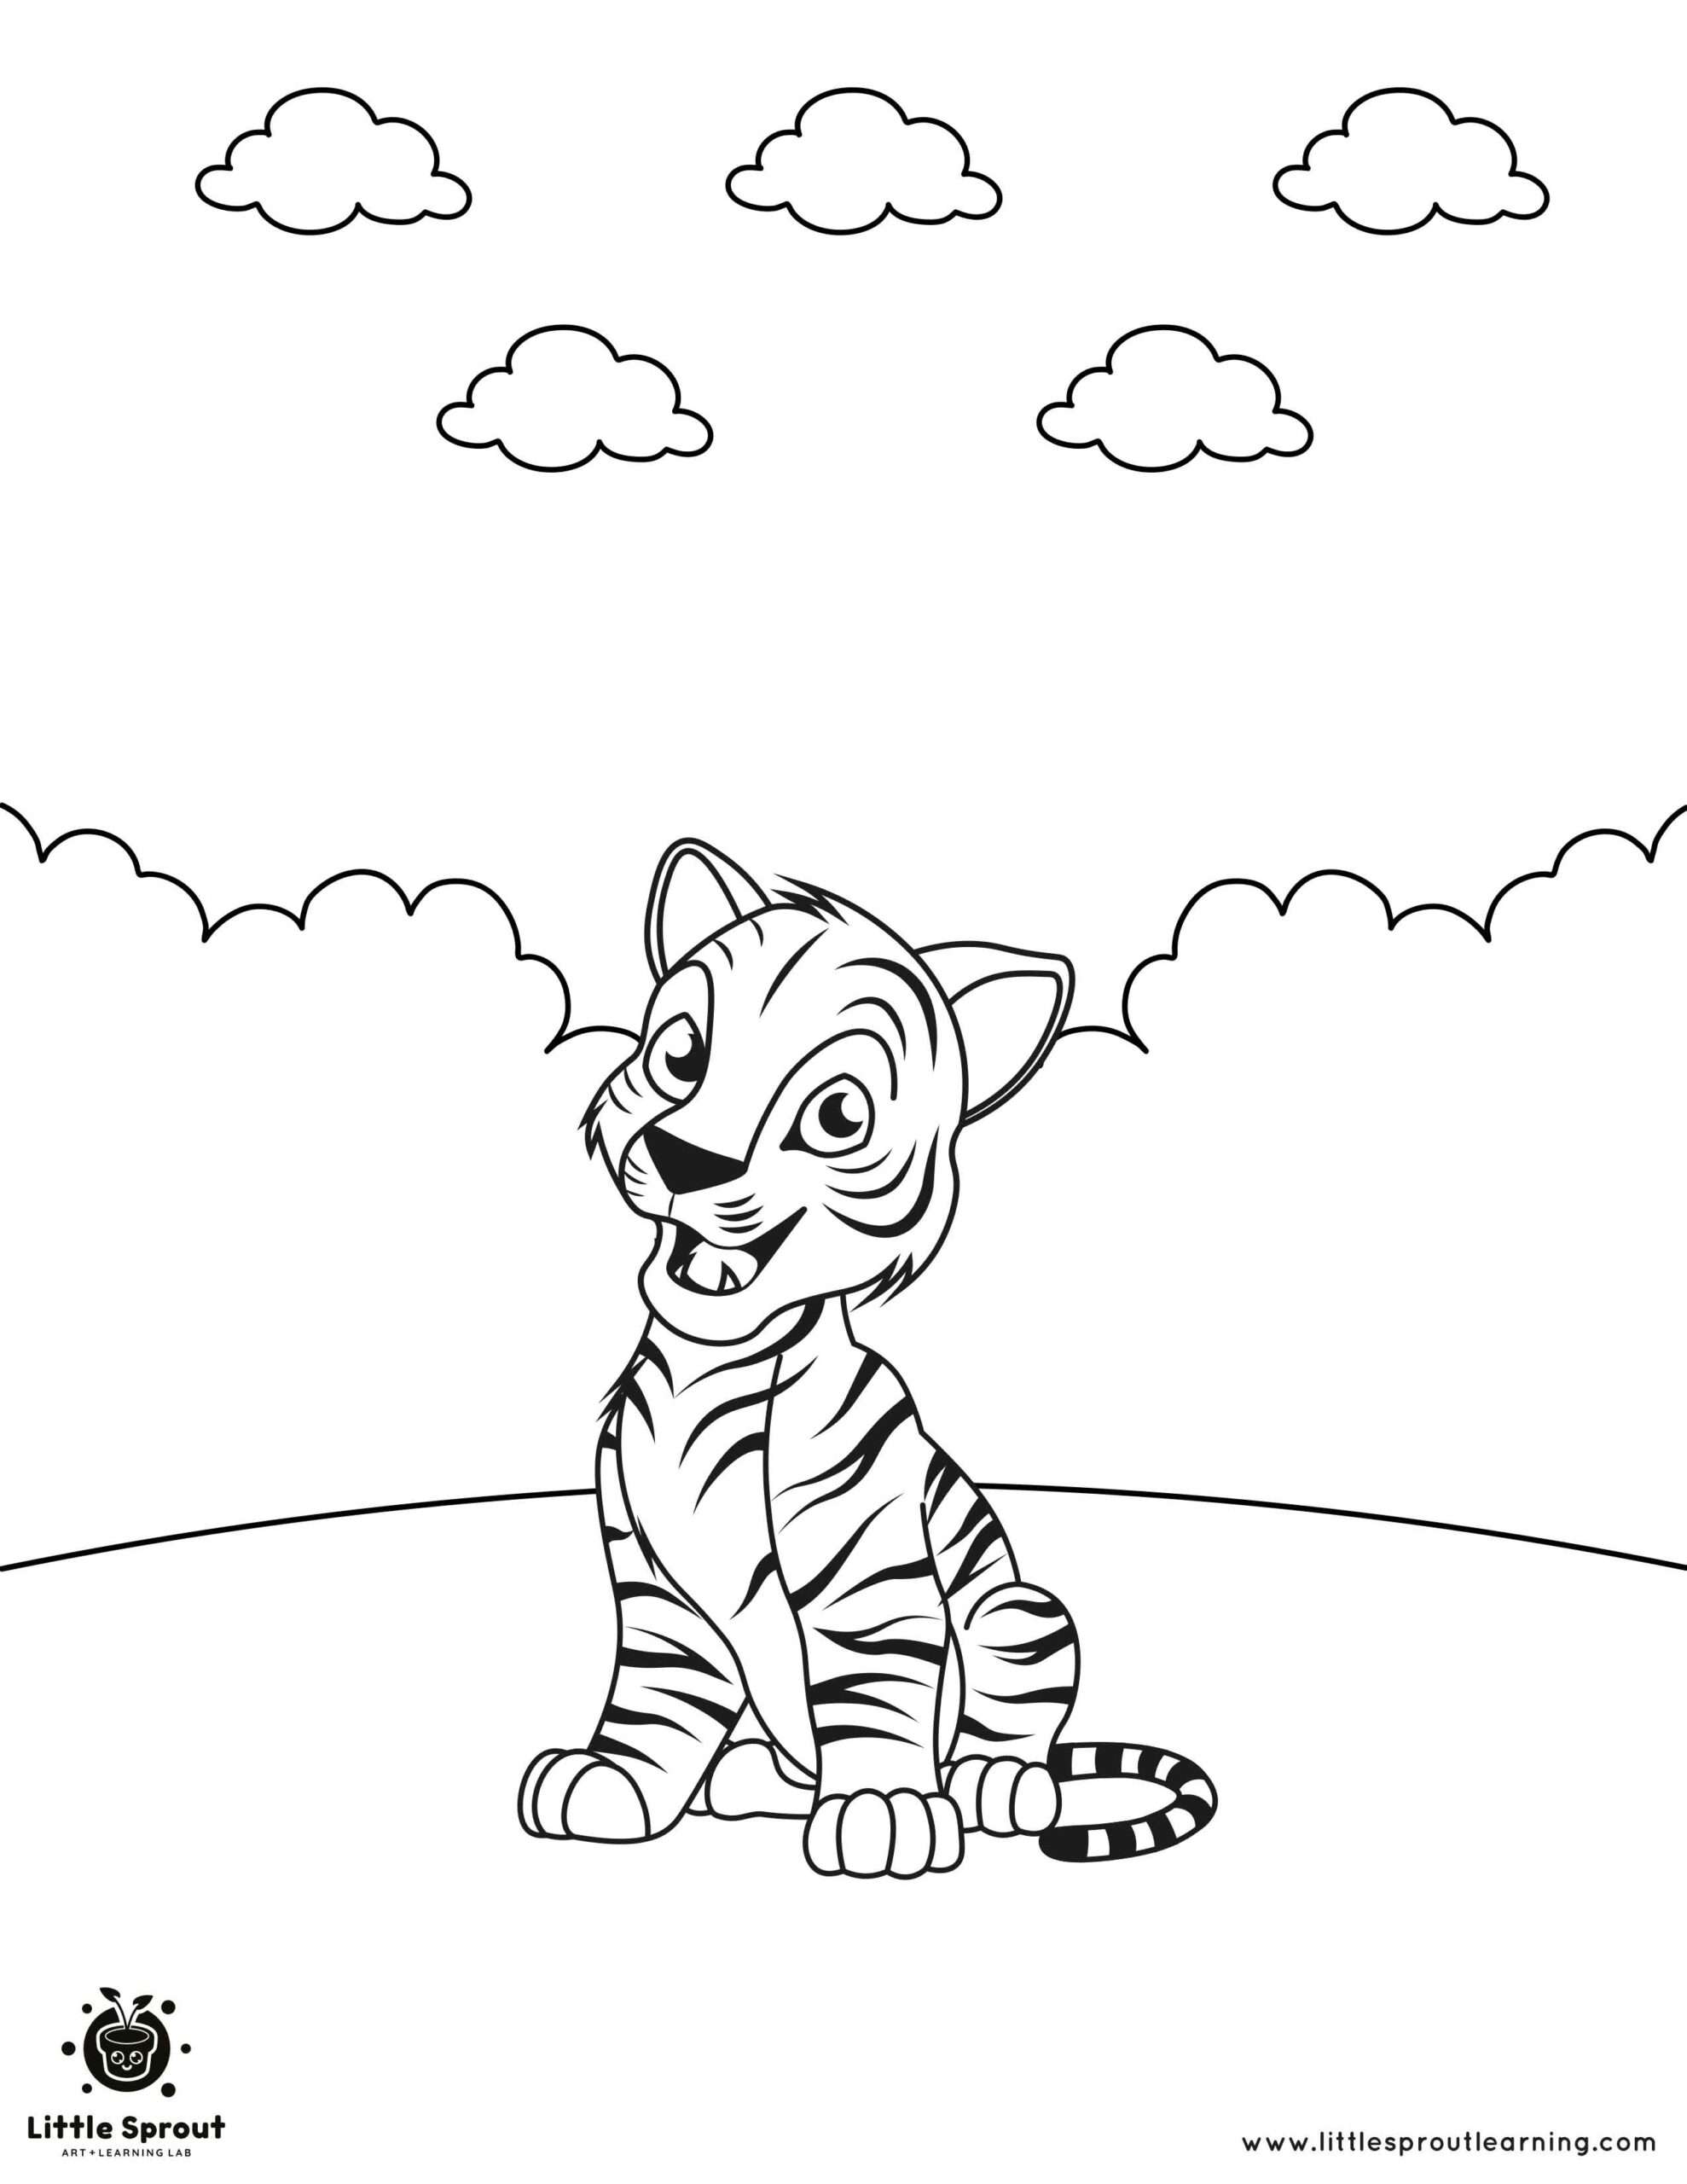 Smiling Cub Tiger Coloring Page